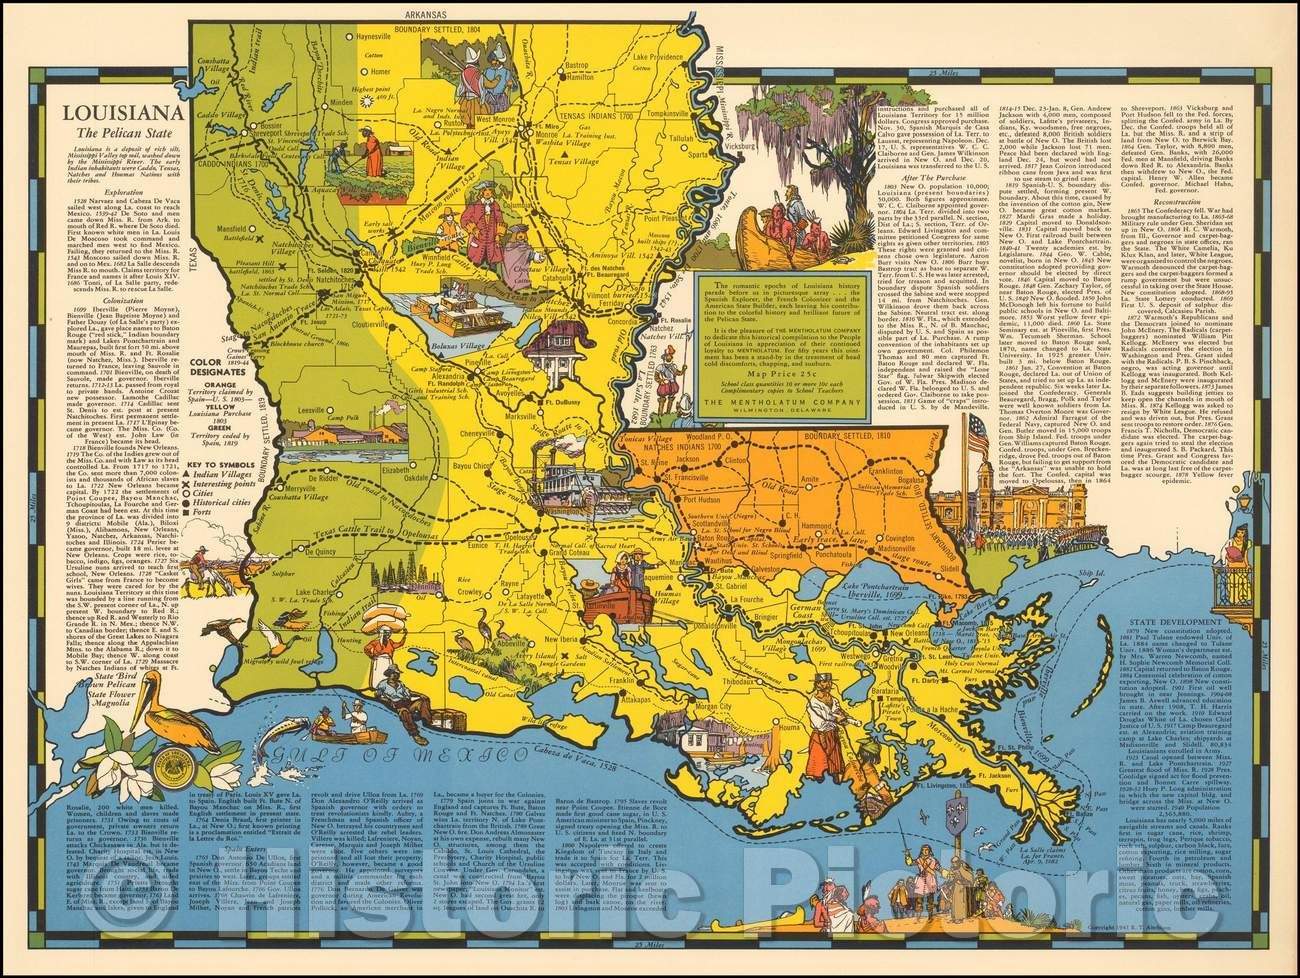 Historic Map - Louisiana The Pelican State, 1941, R.T. Aitchison v1